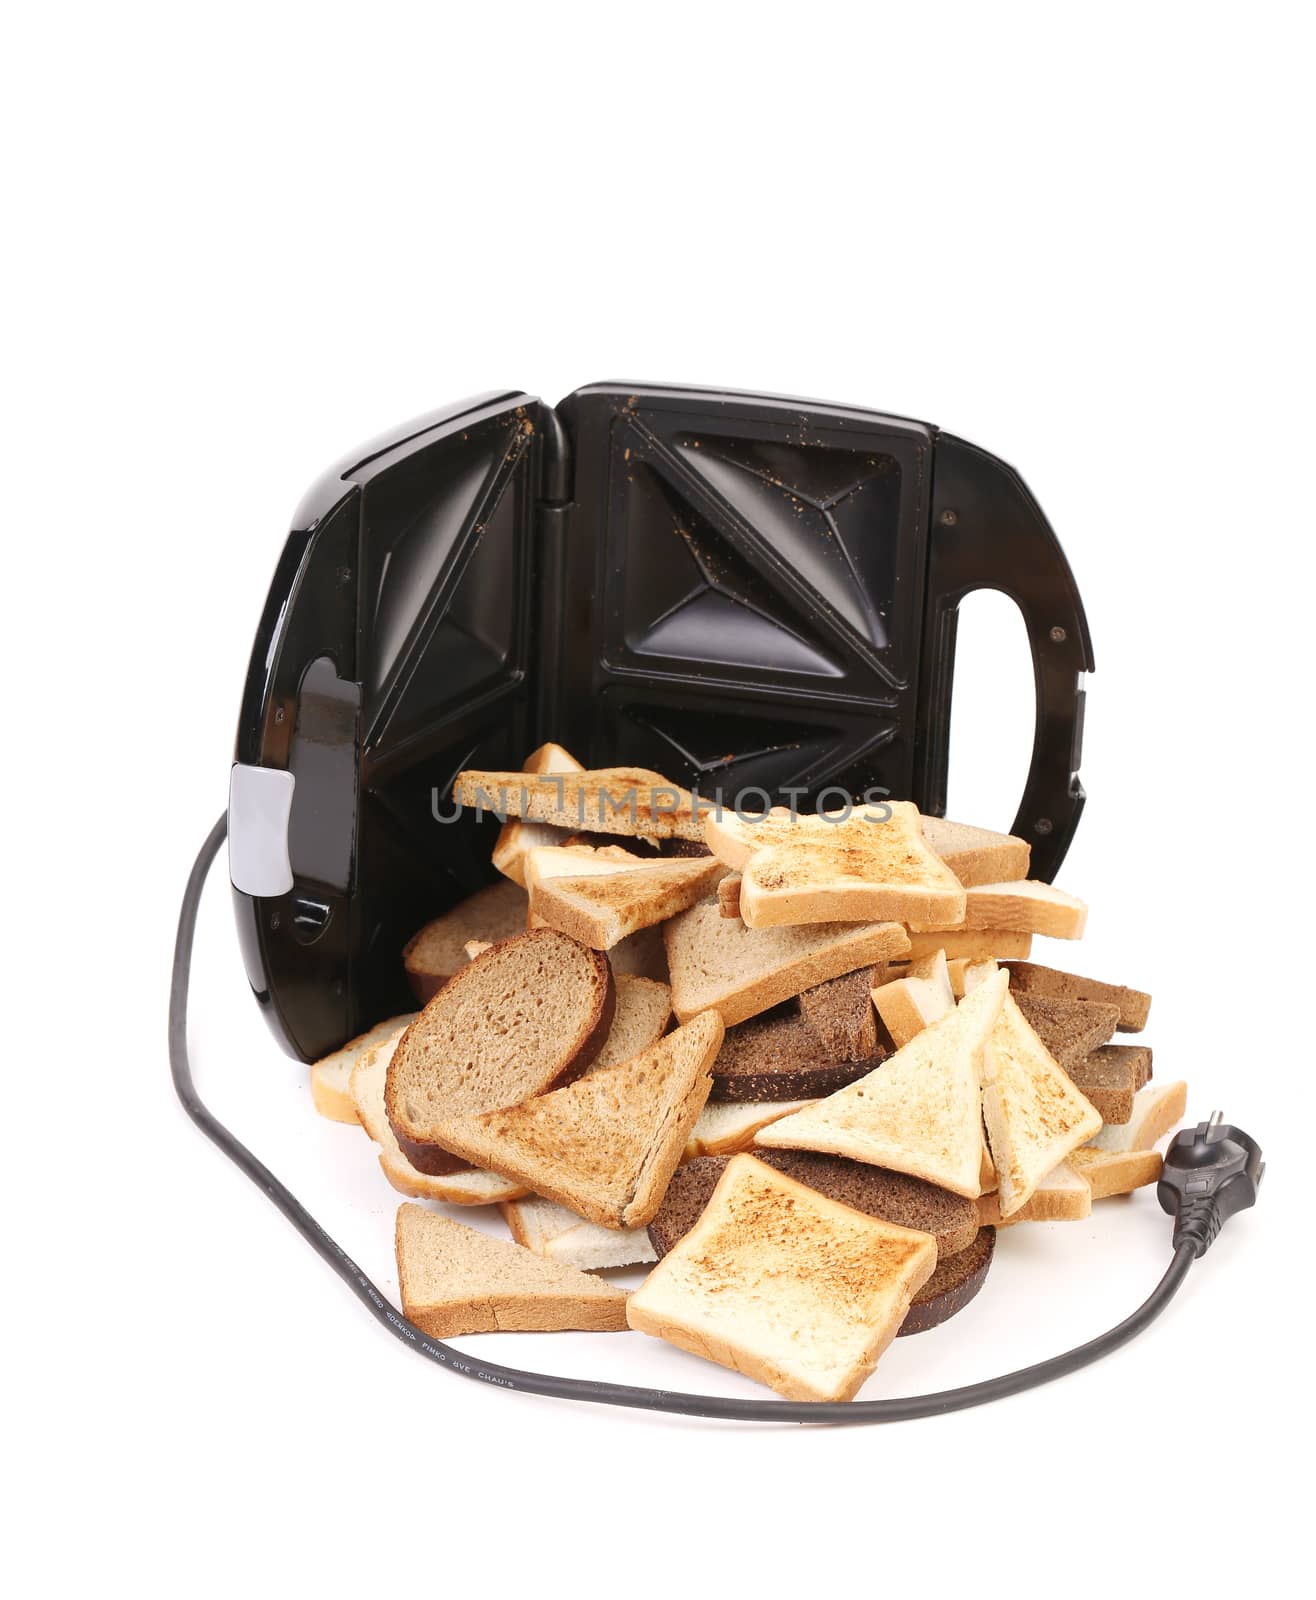 Toaster with bread slices. Isolated on a white background.